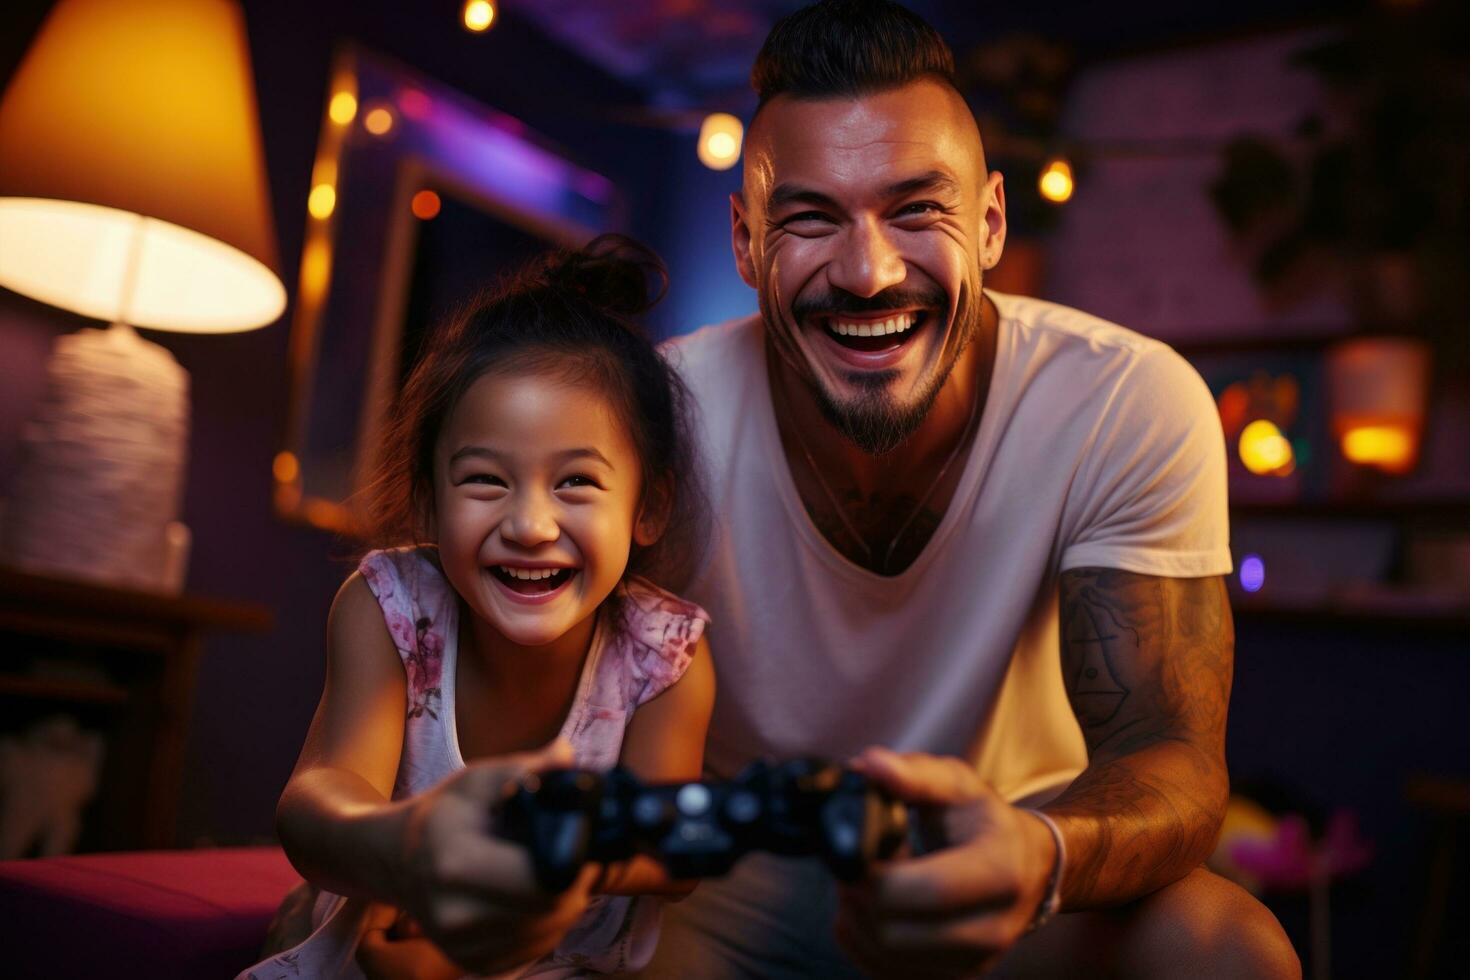 Father and Daughter Bond over Video Games Picture photo